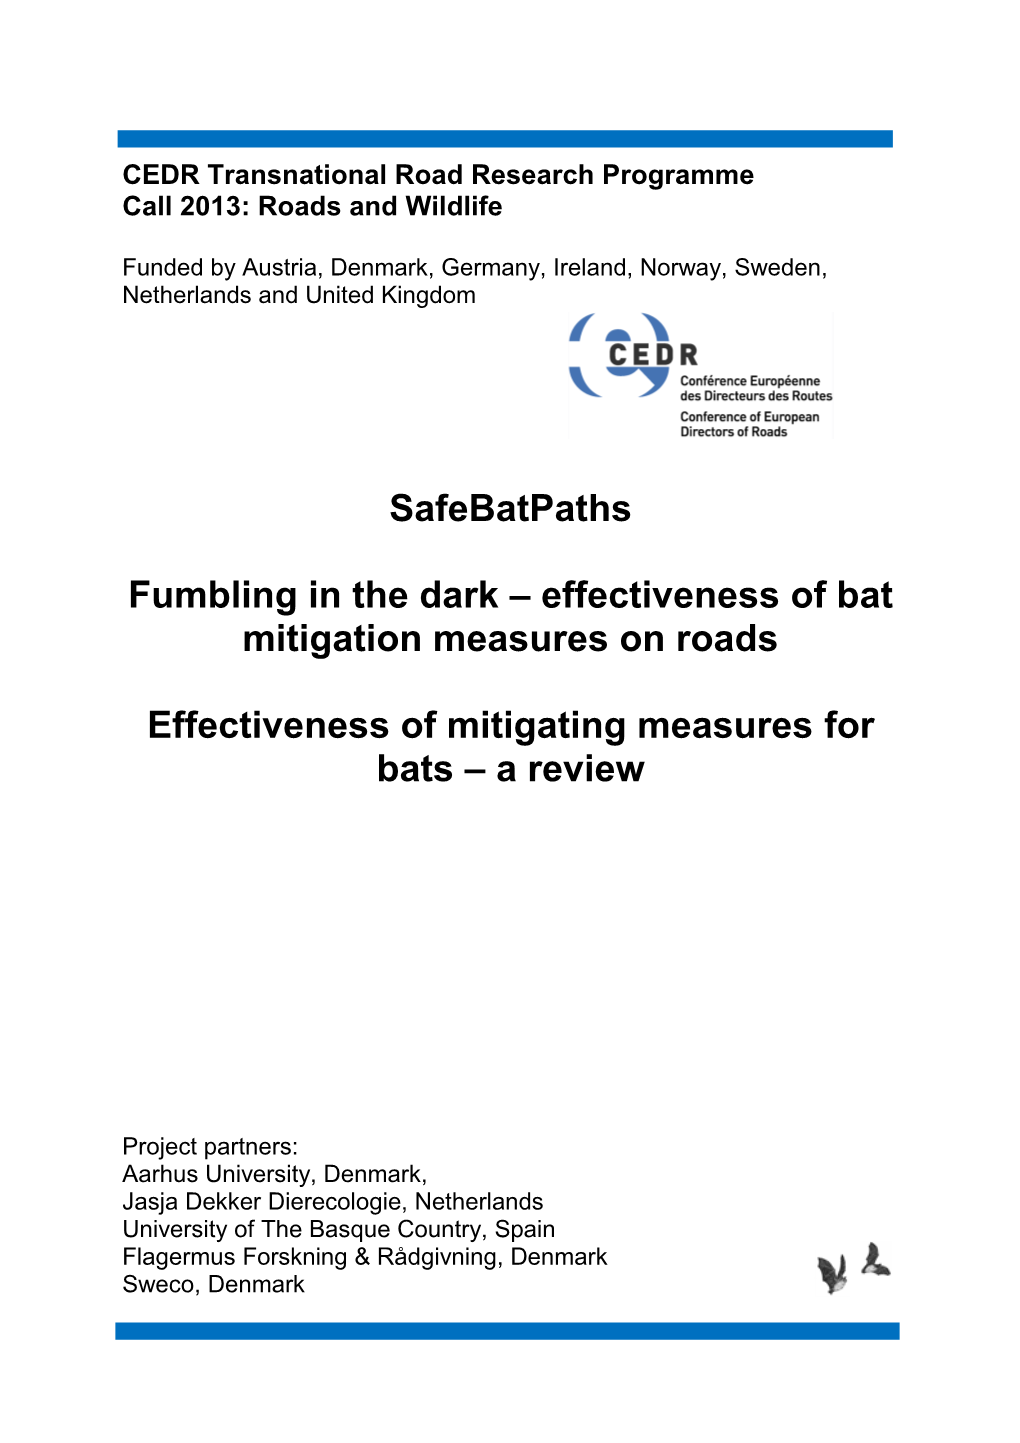 Effectiveness of Mitigating Measures for Bats – a Review